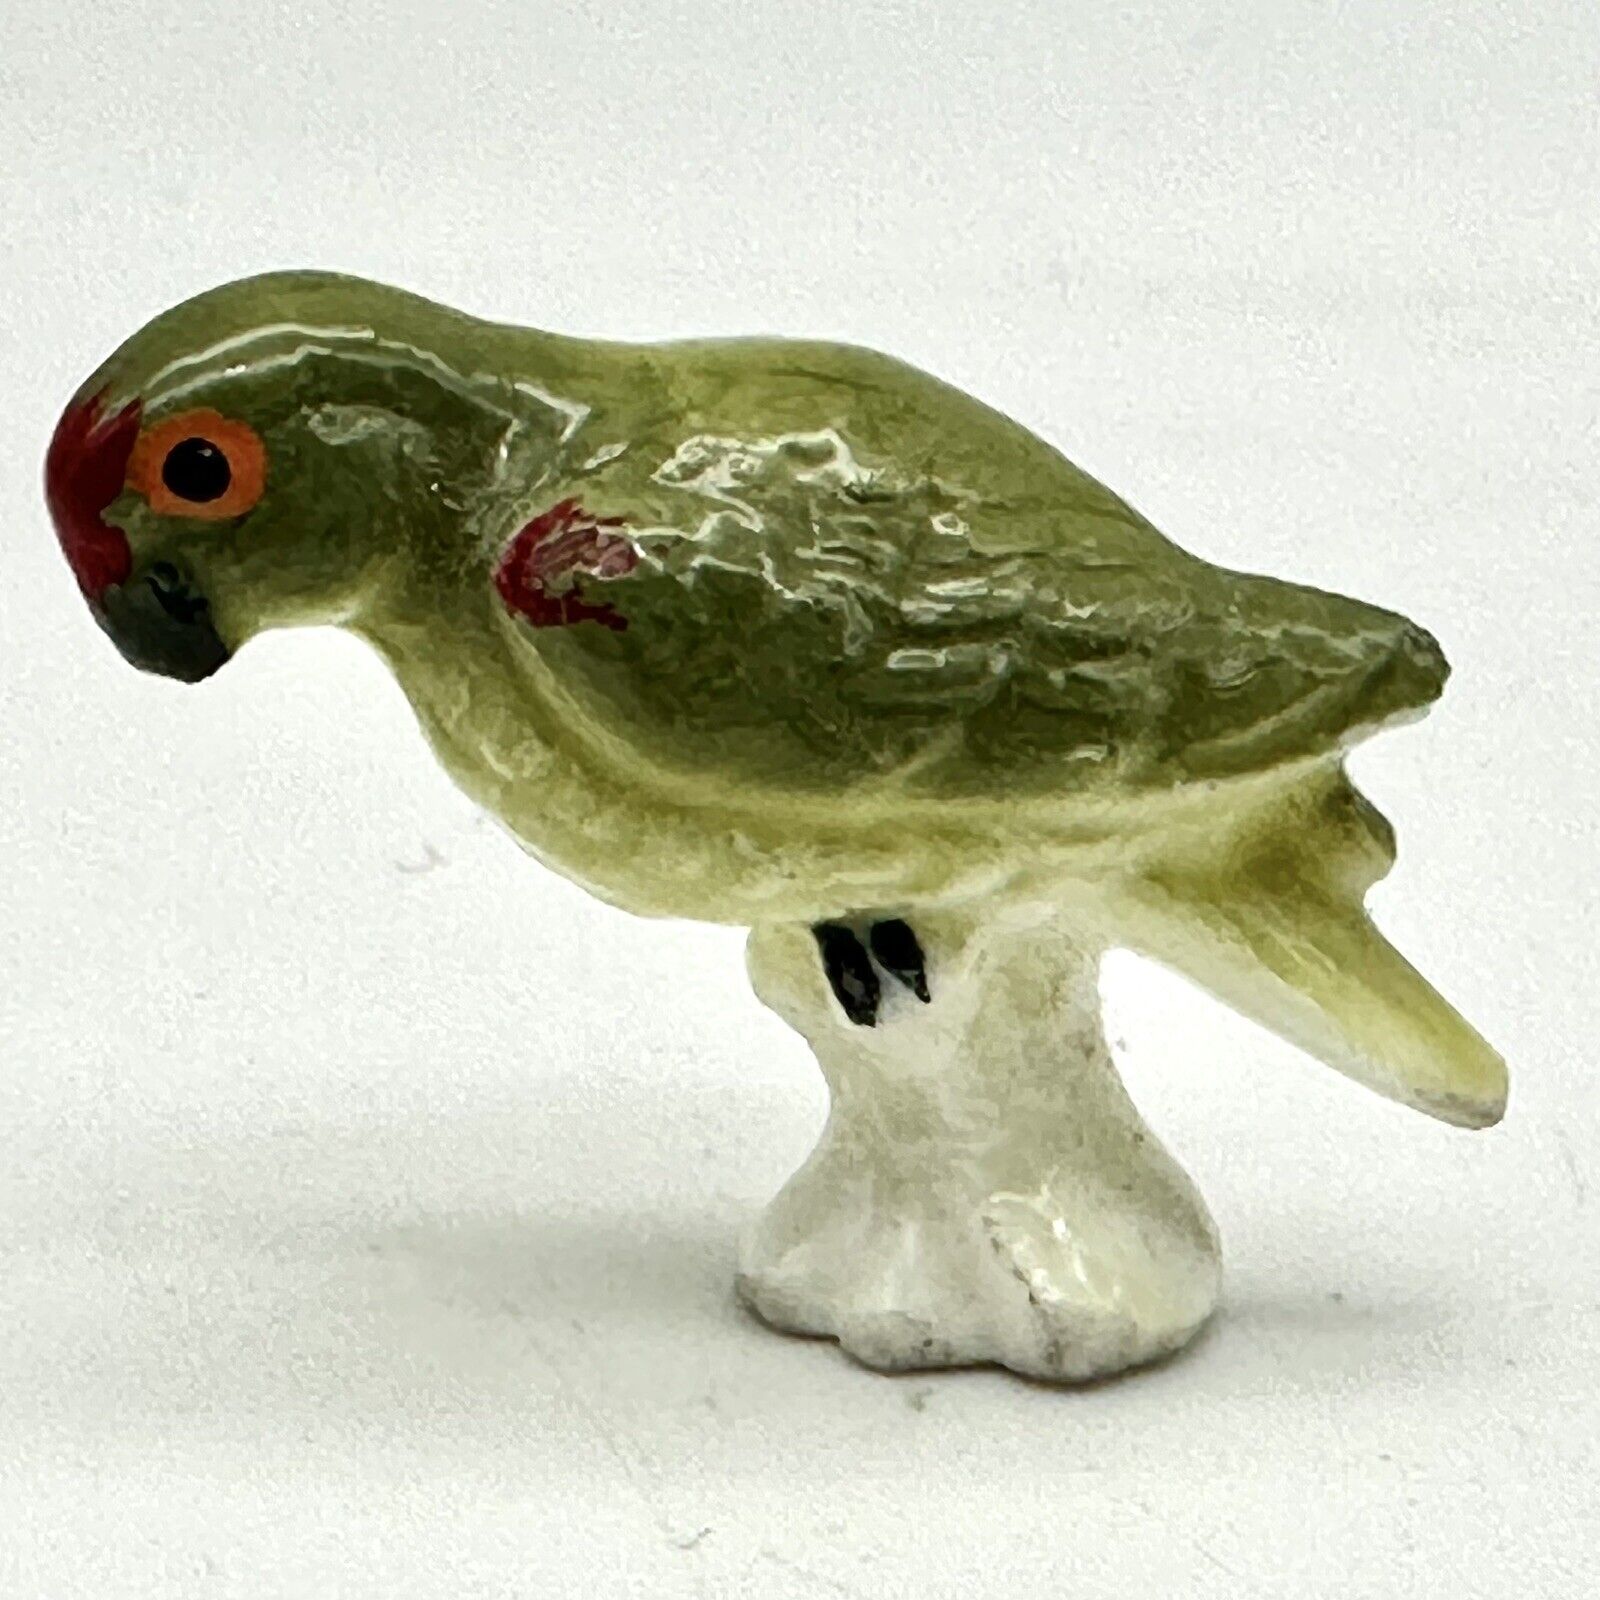 Vintage Bug House Bone China Miniature Green and Red Parrot Bird Figurine